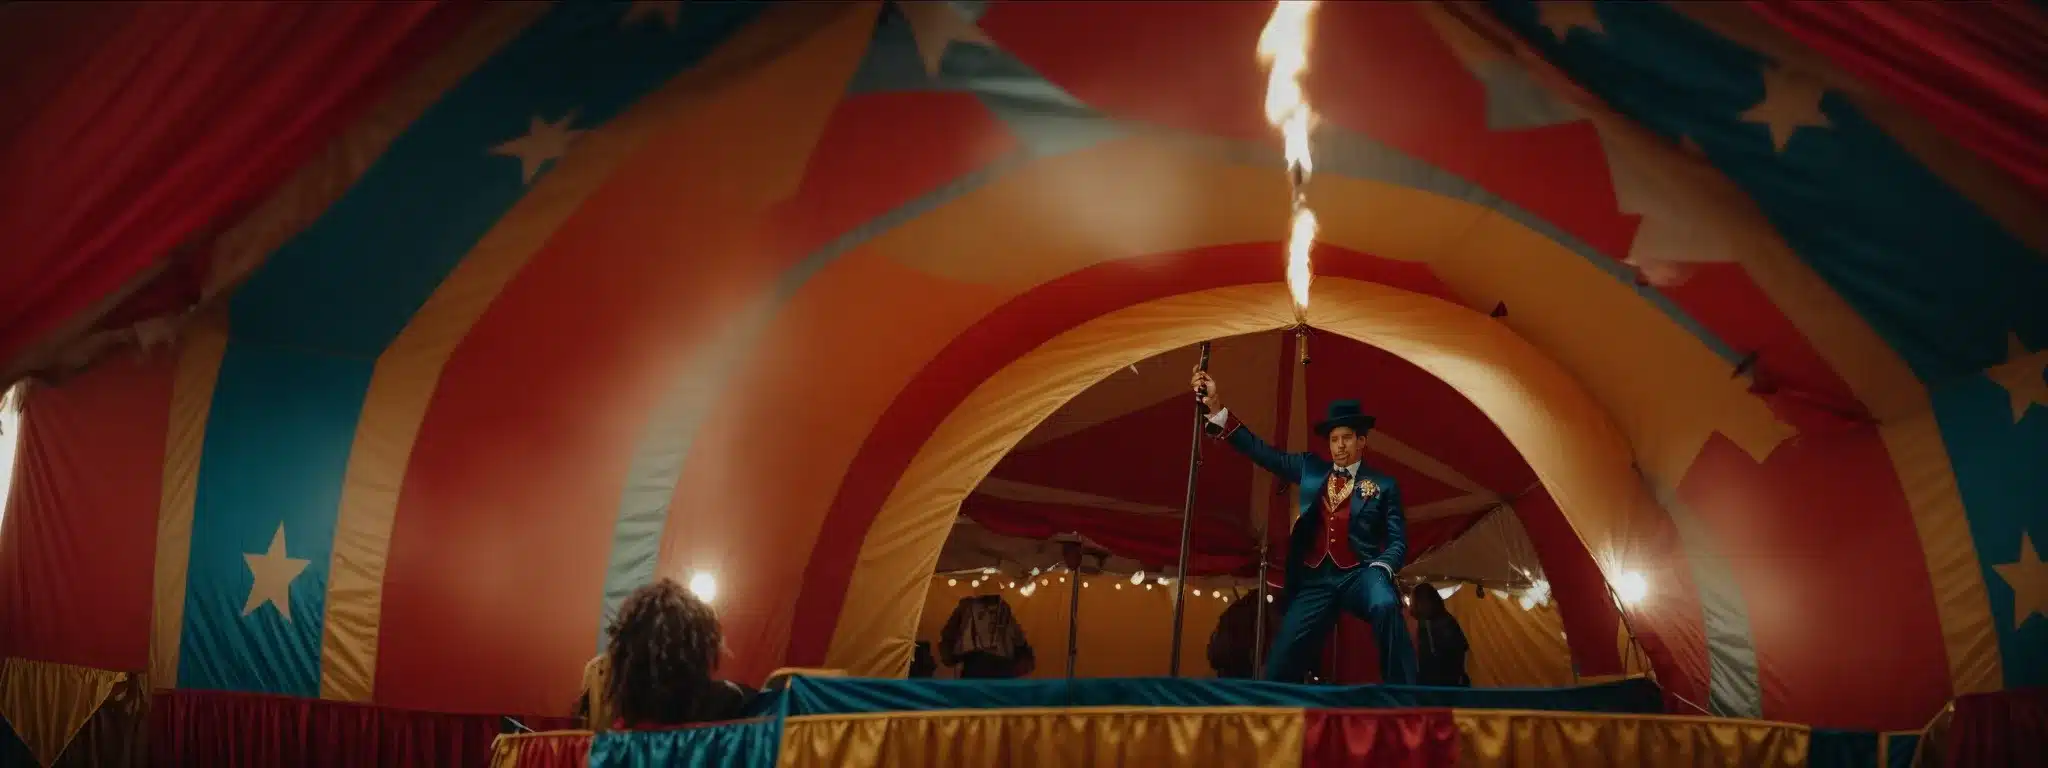 A Scene With A Ringmaster In A Colorful Circus Tent, Poised To Jump Through A Large Fiery Hoop In The Center Of The Ring.